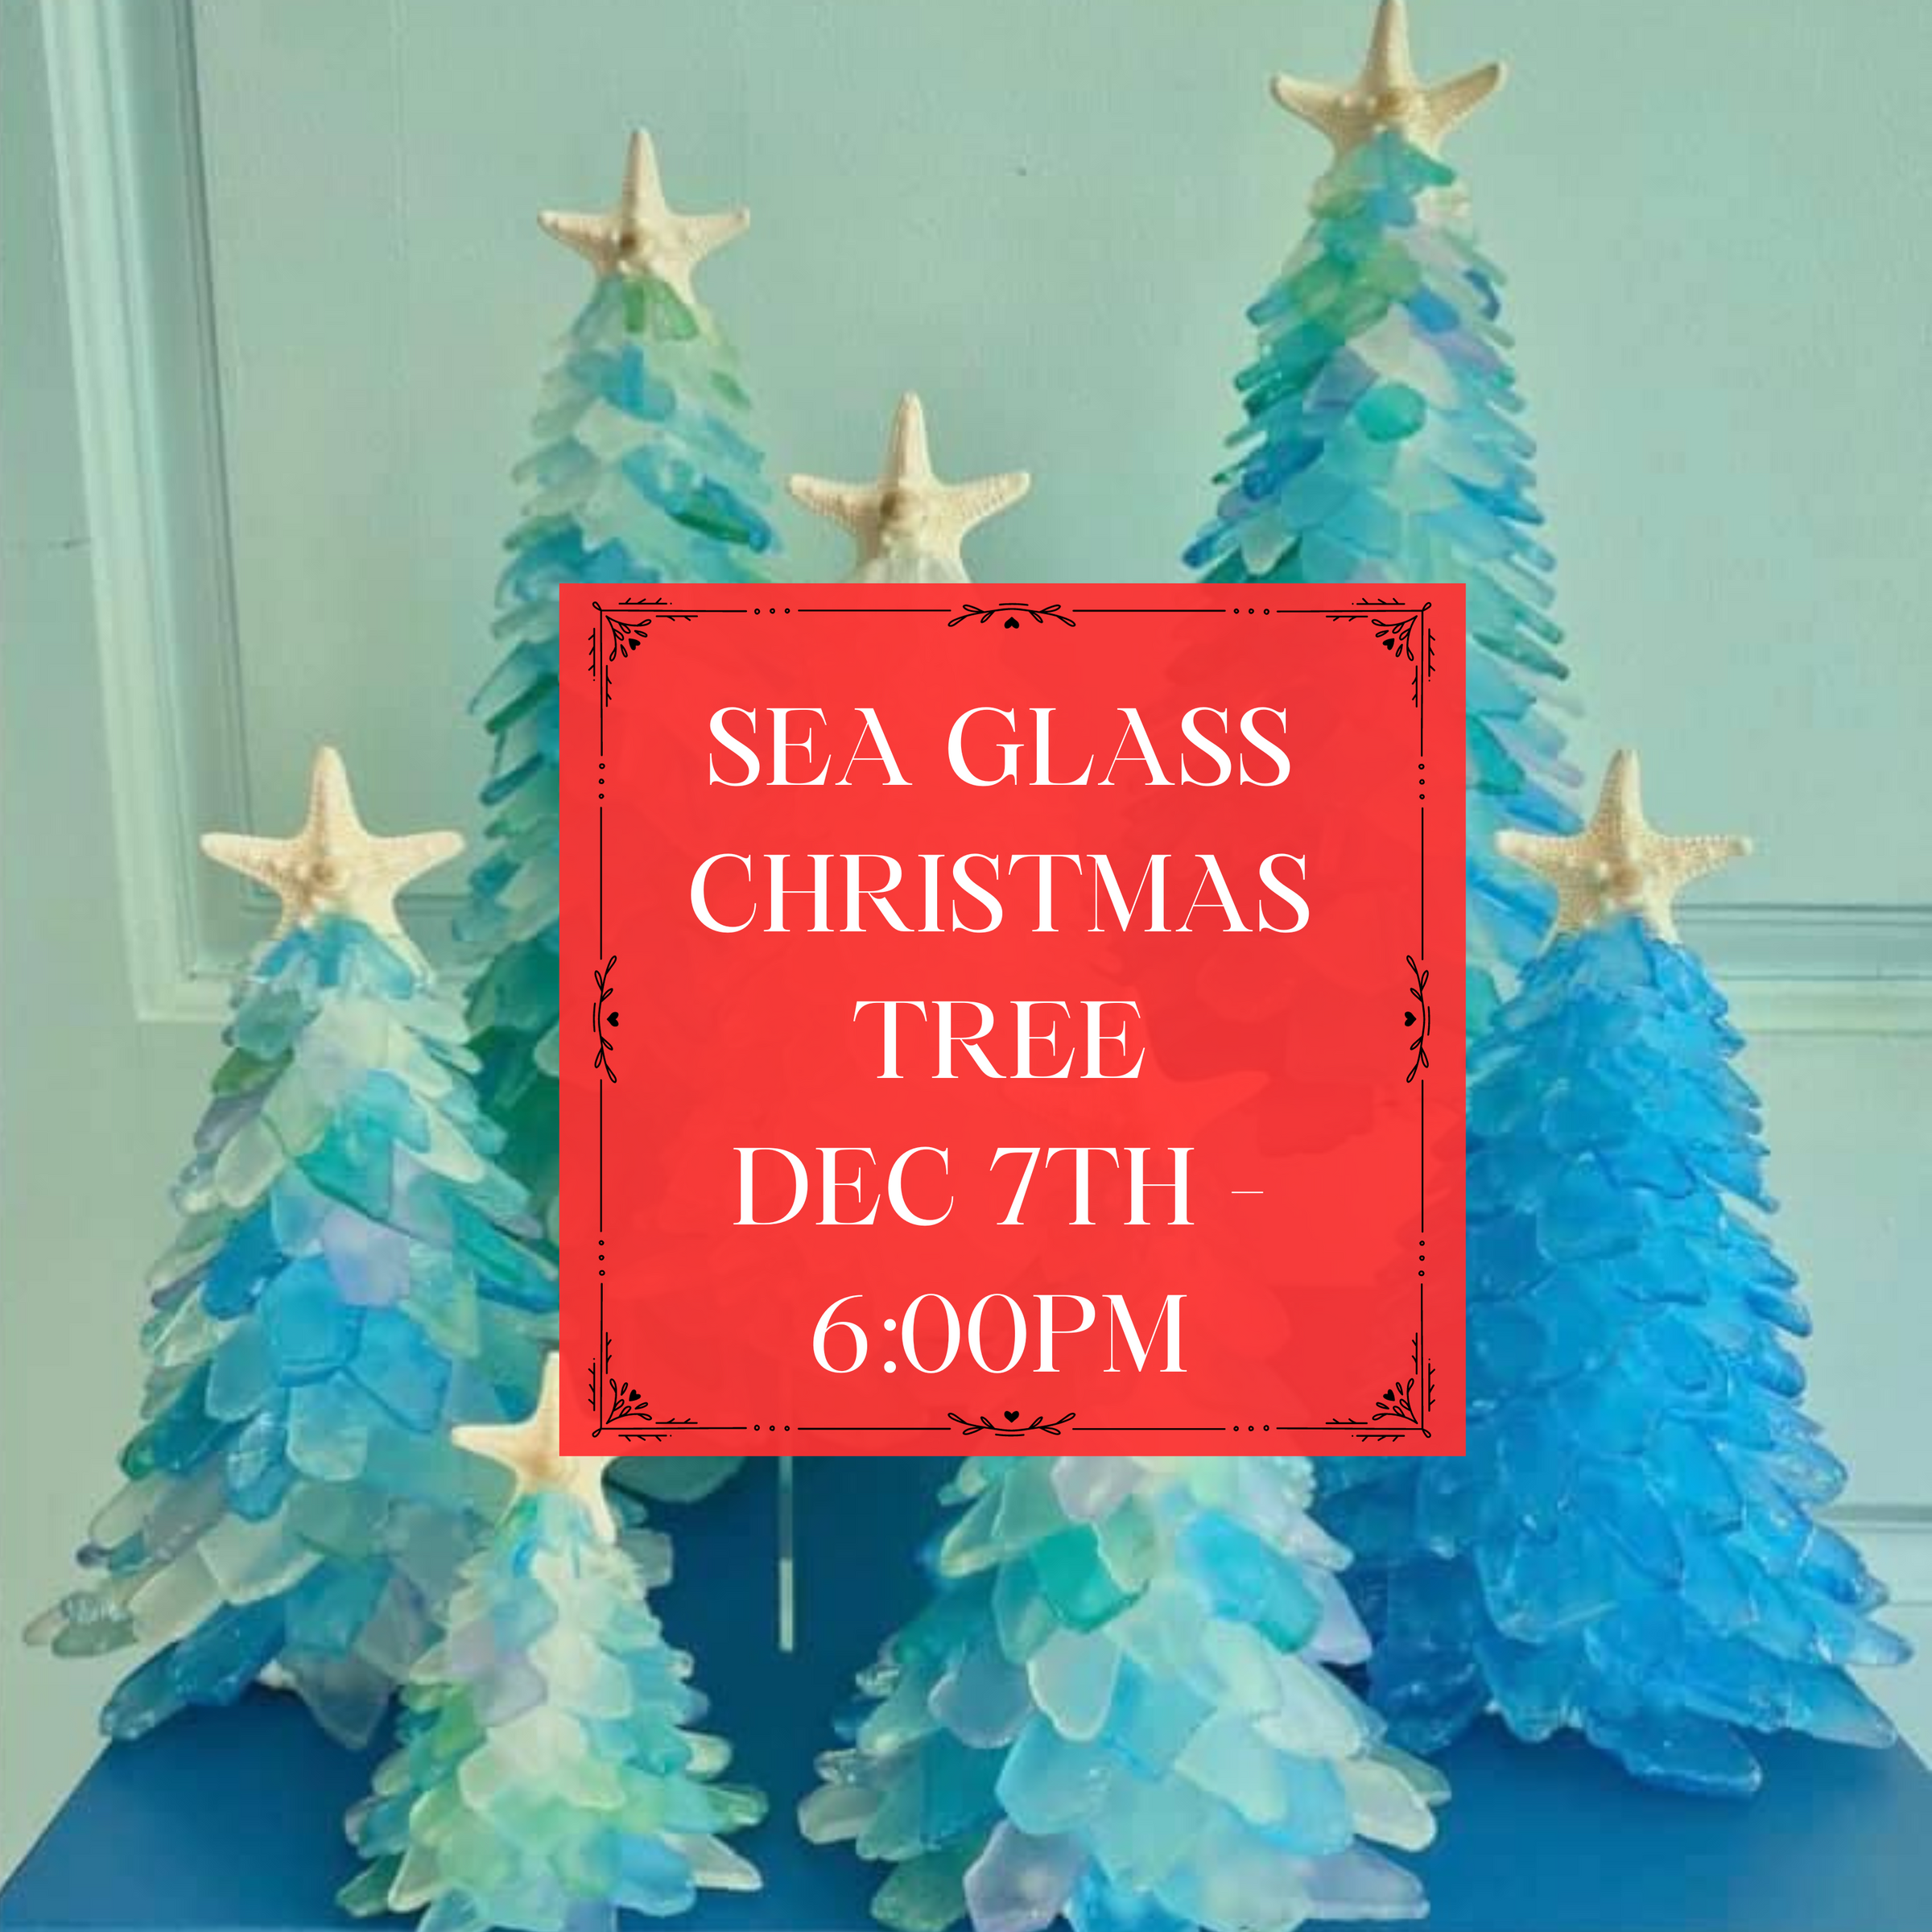 SEA GLASS LIGHTED TREES - DEC 7TH, 6:00 PM